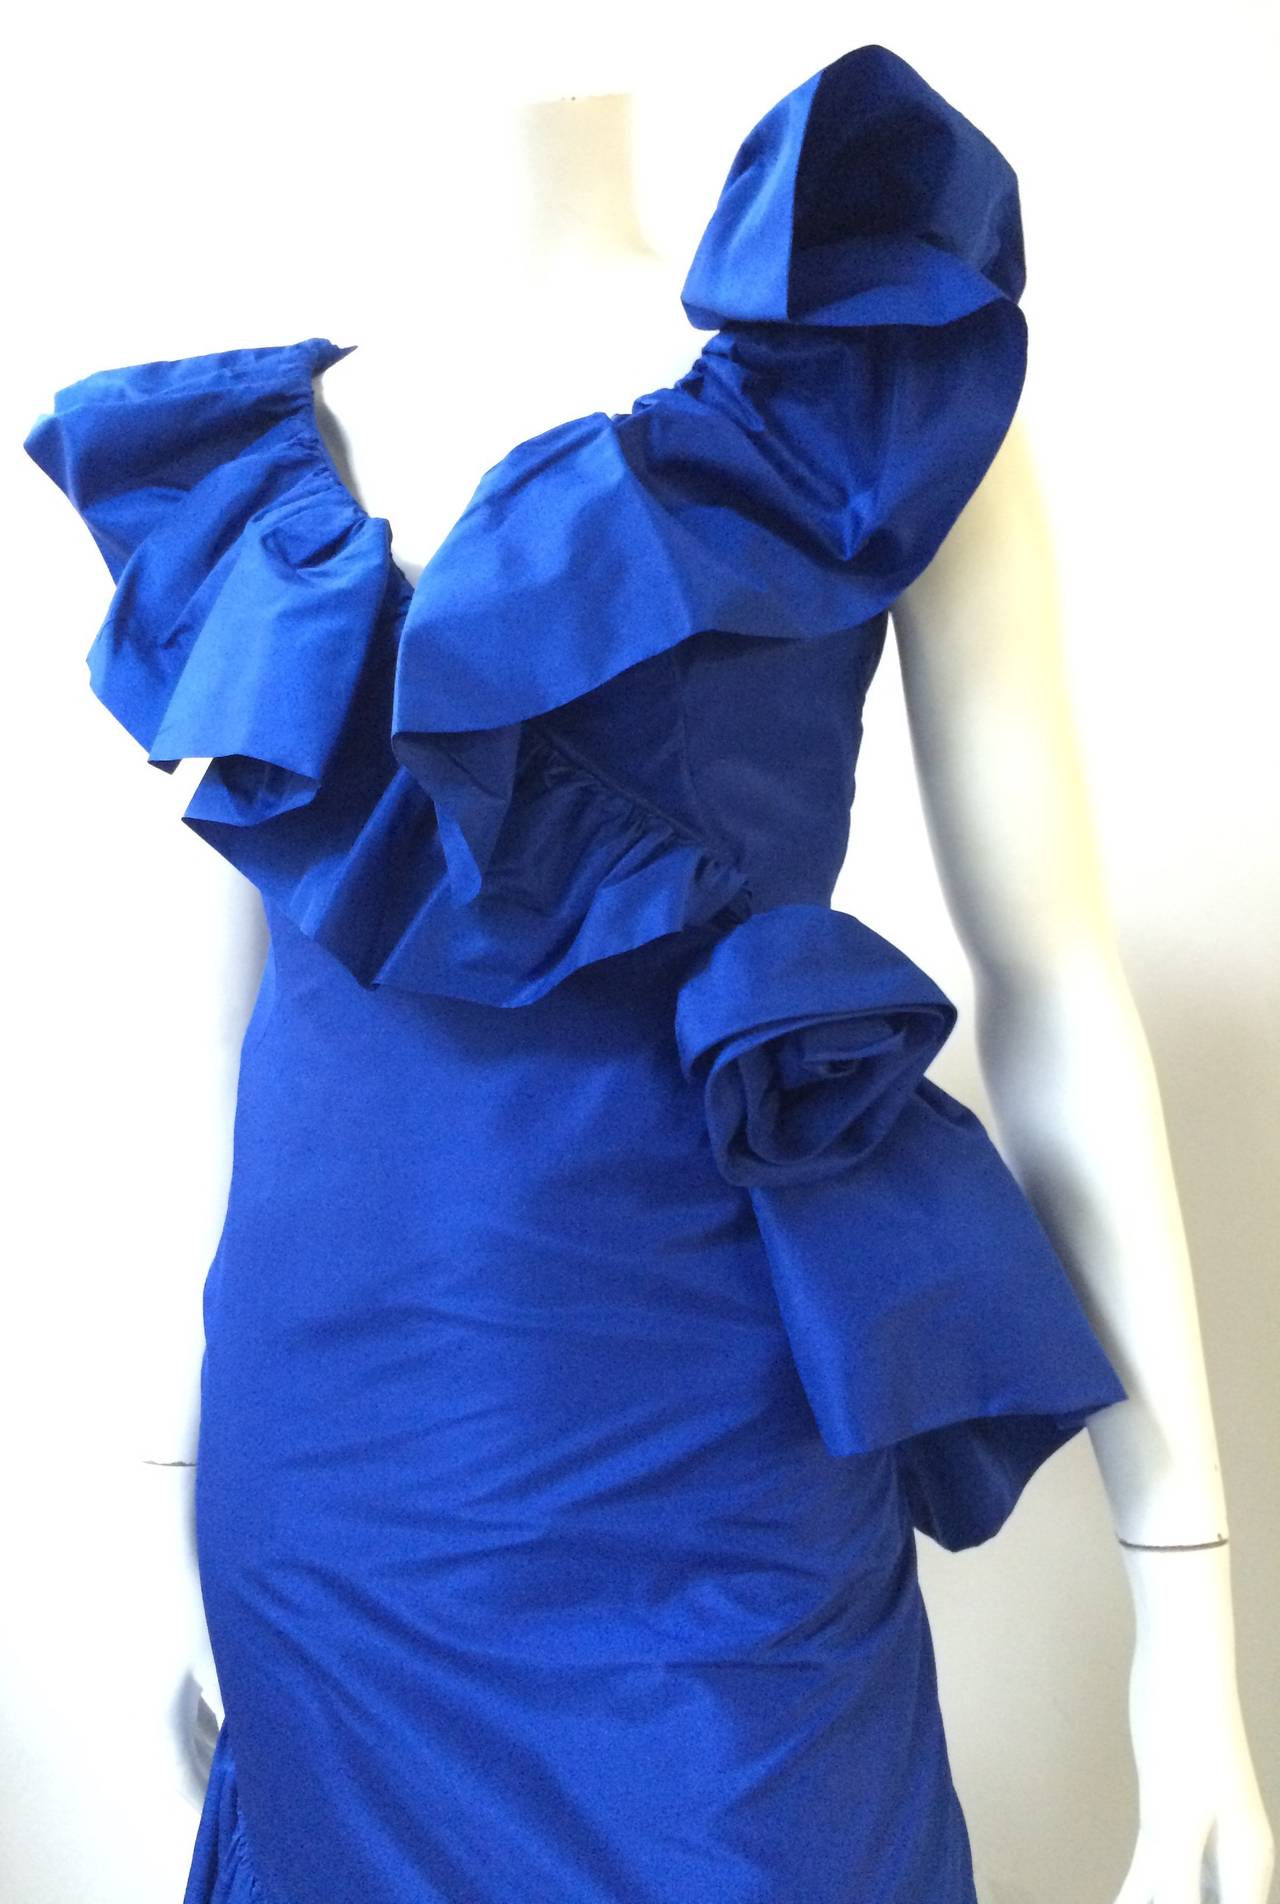 Mignon for Neiman Marcus 80s ruffled & layered cobalt blue taffeta gown is a size 6 but please see measurements. This ruffled v-neck collar gown with a rose on the side with spiral layered bottom is timeless. Designed by Dorothy Farbo for Mignon